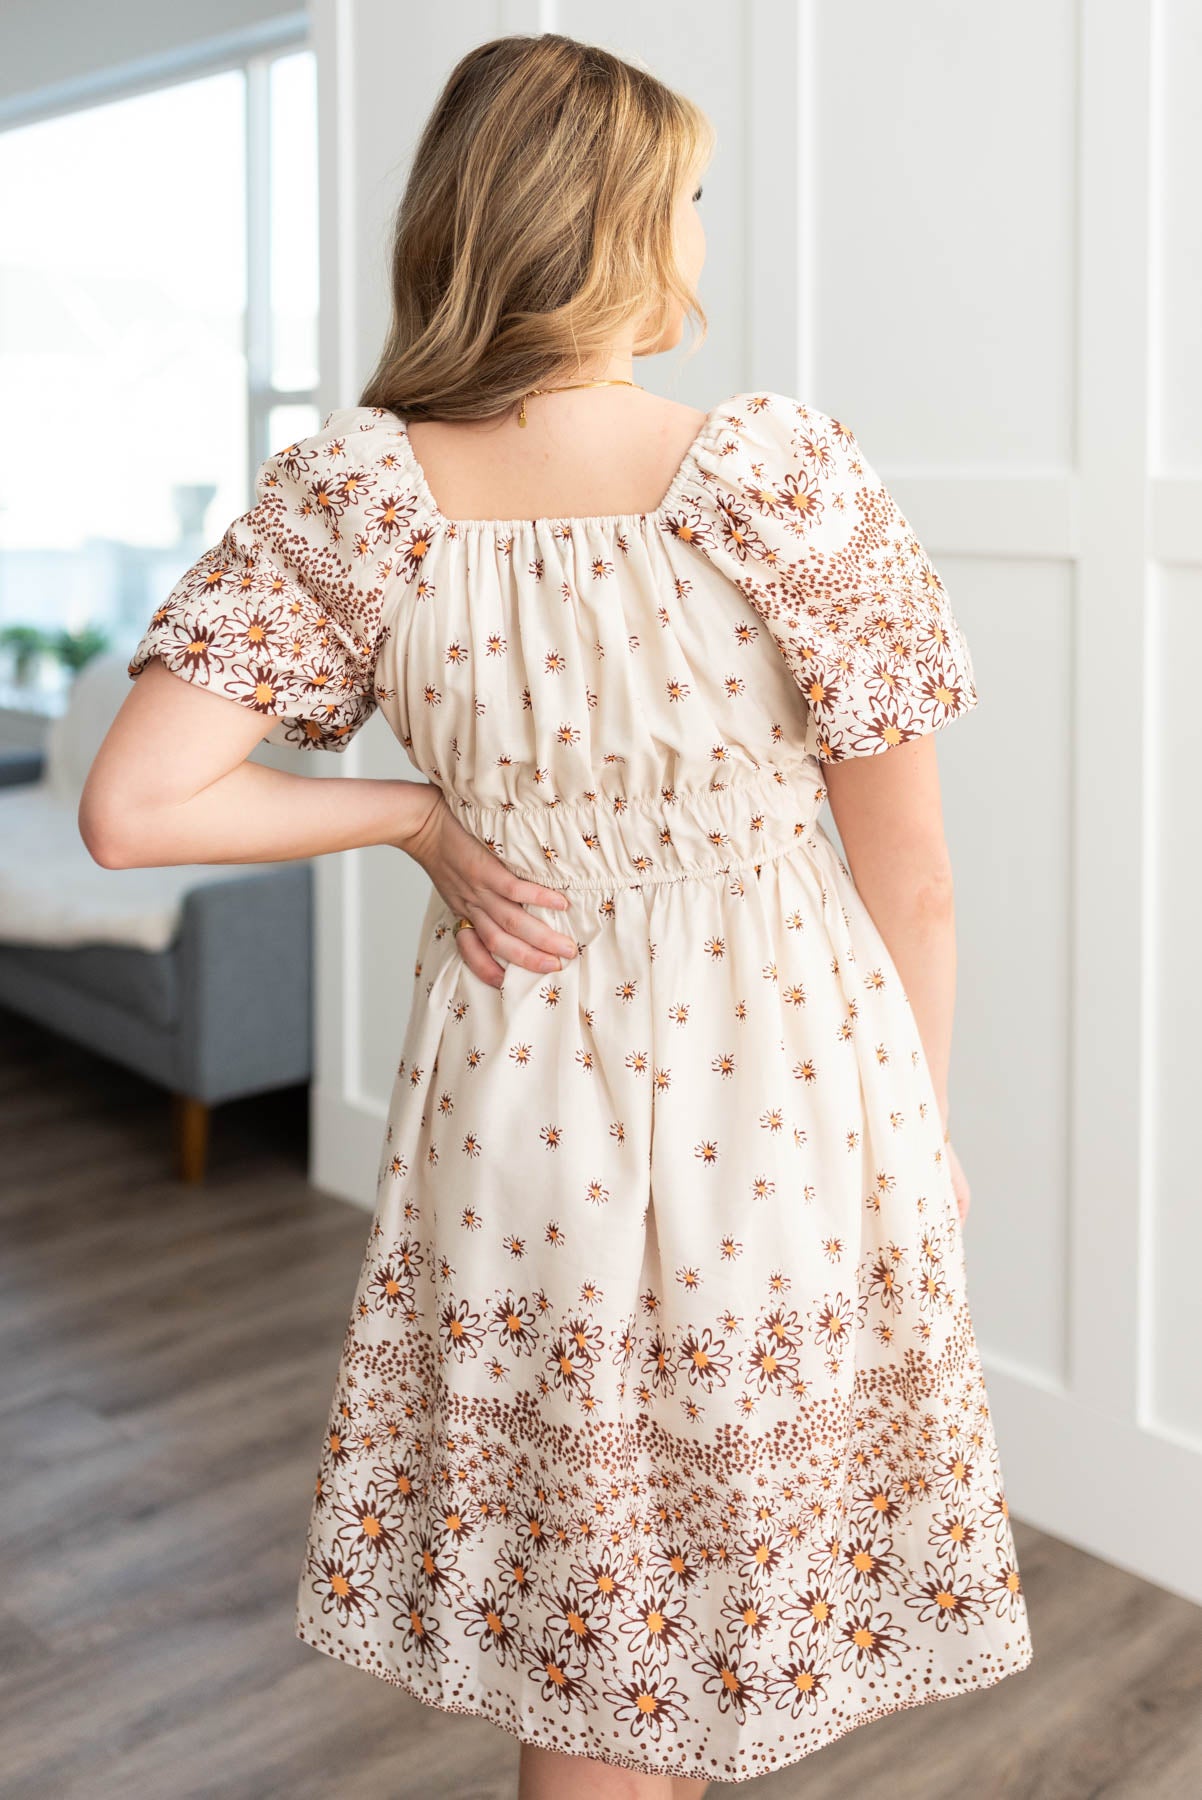 Back view of the beige daisy dress